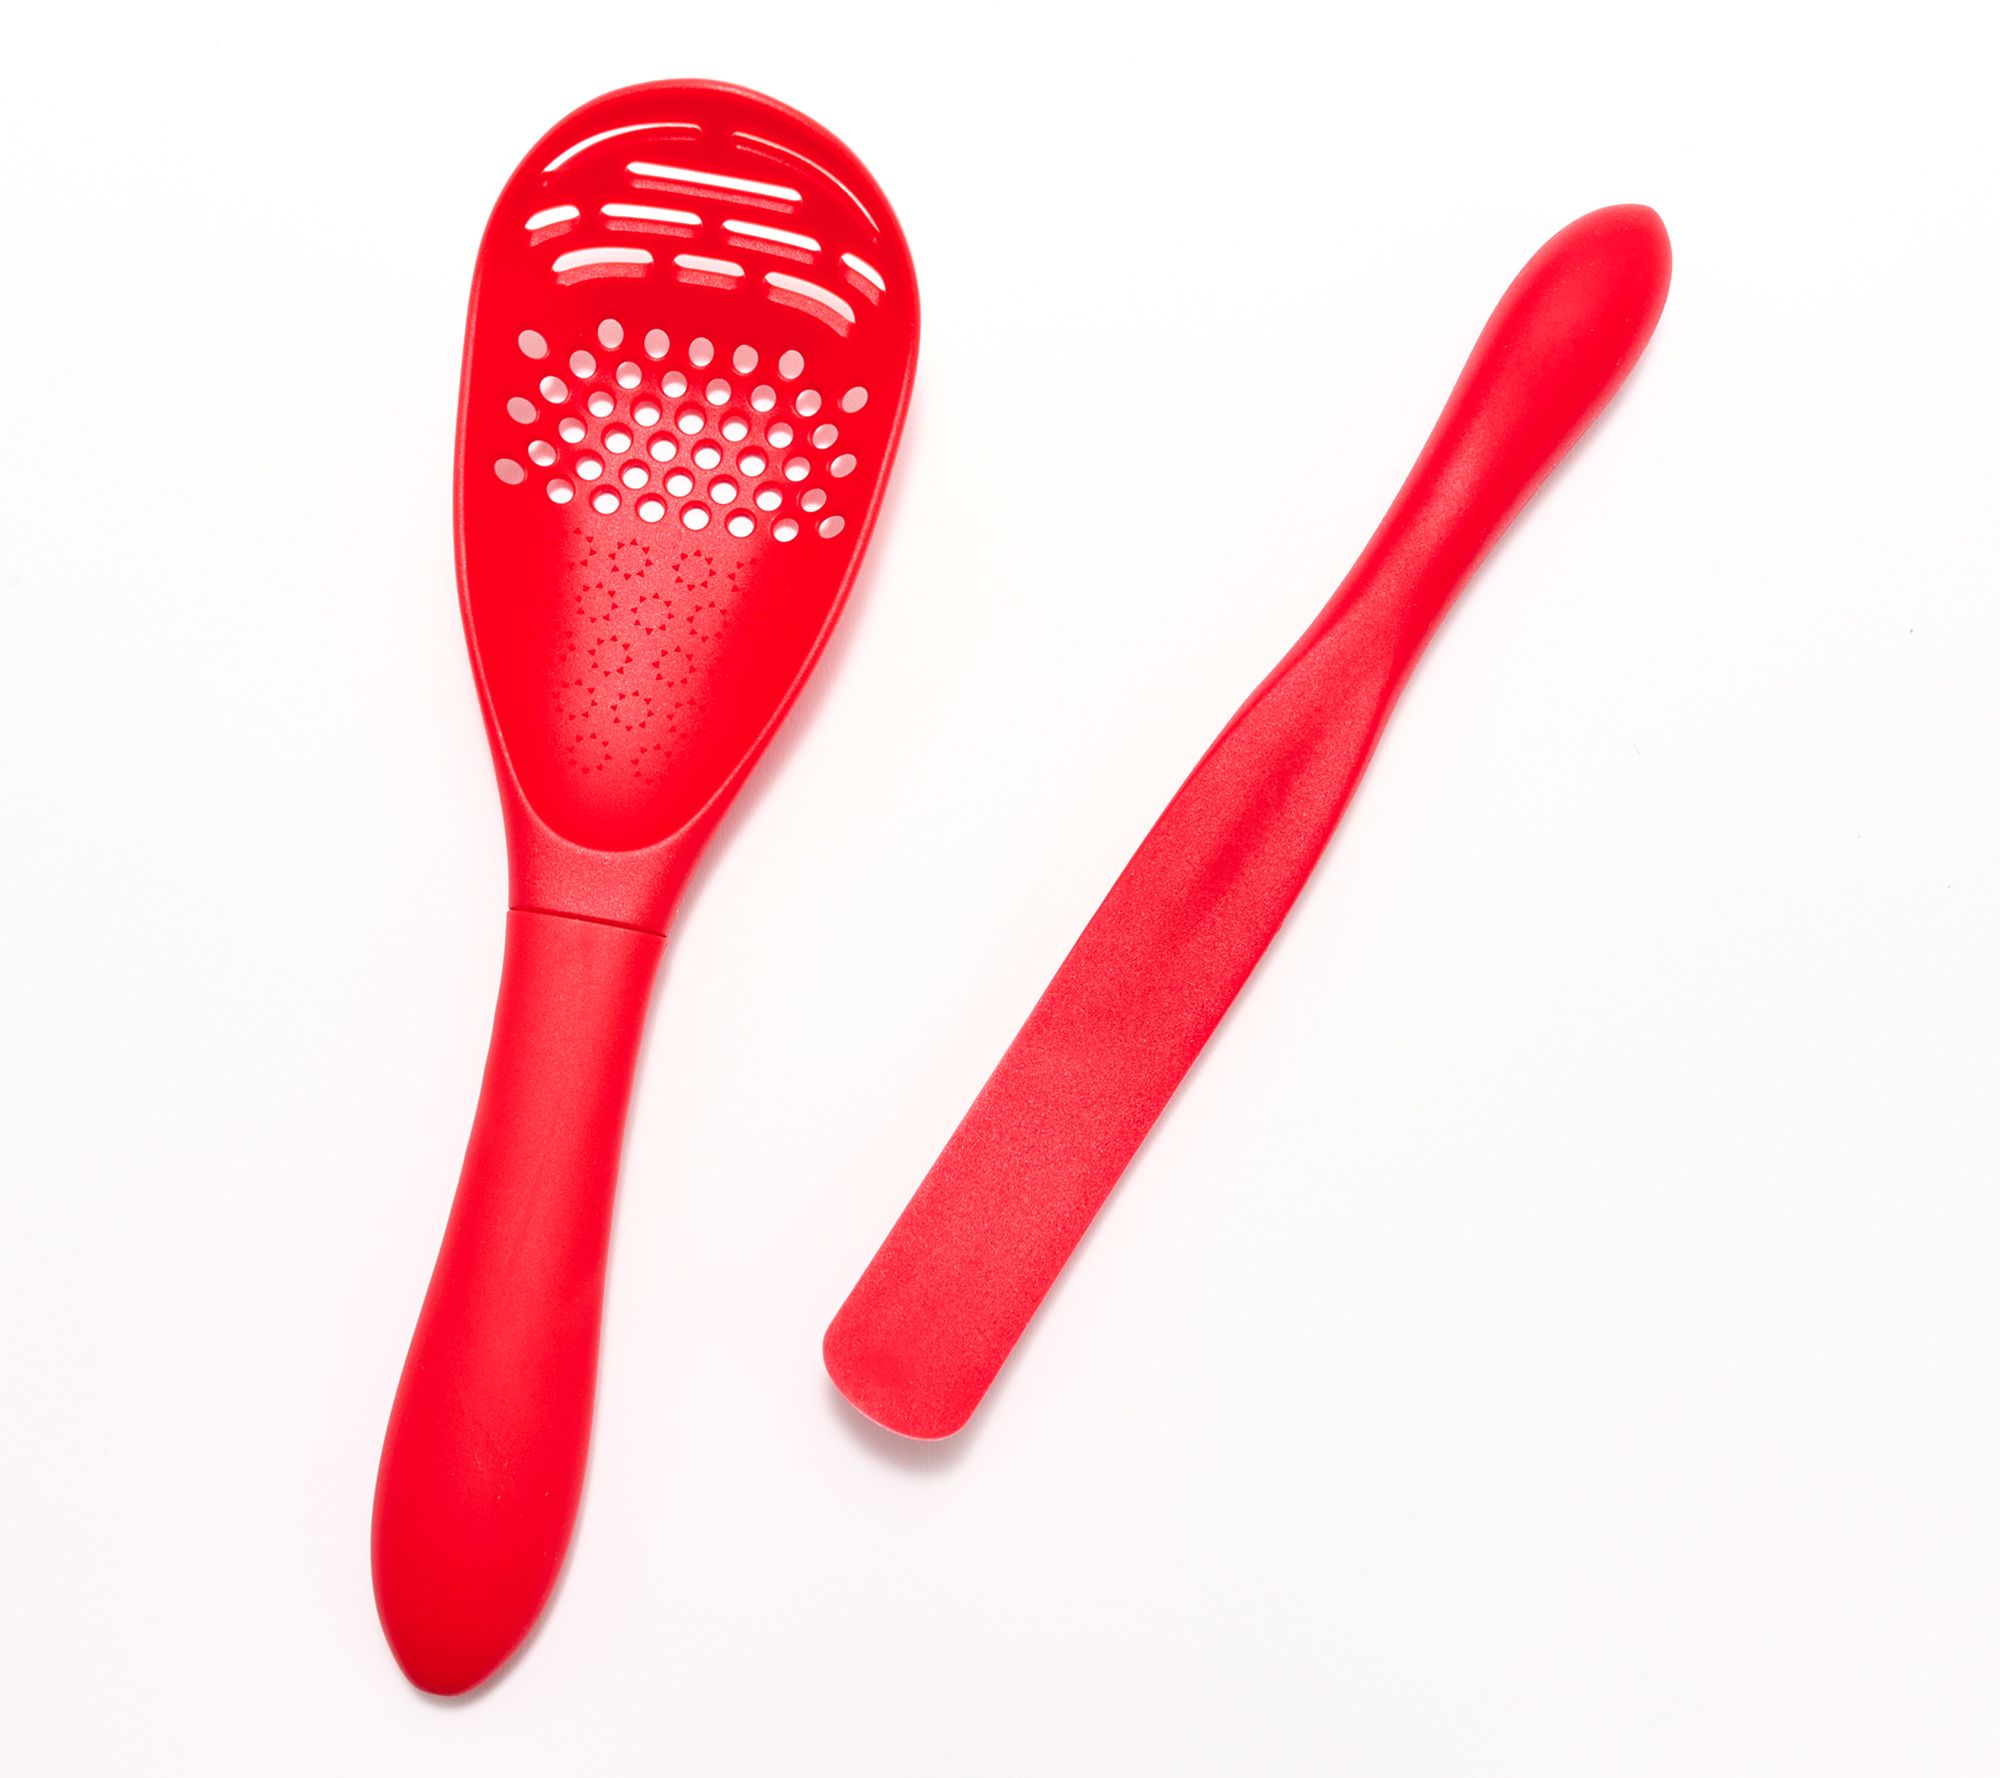 Mad Hungry 3-Piece Silicone Measuring Cup & Spoon Set - Orange